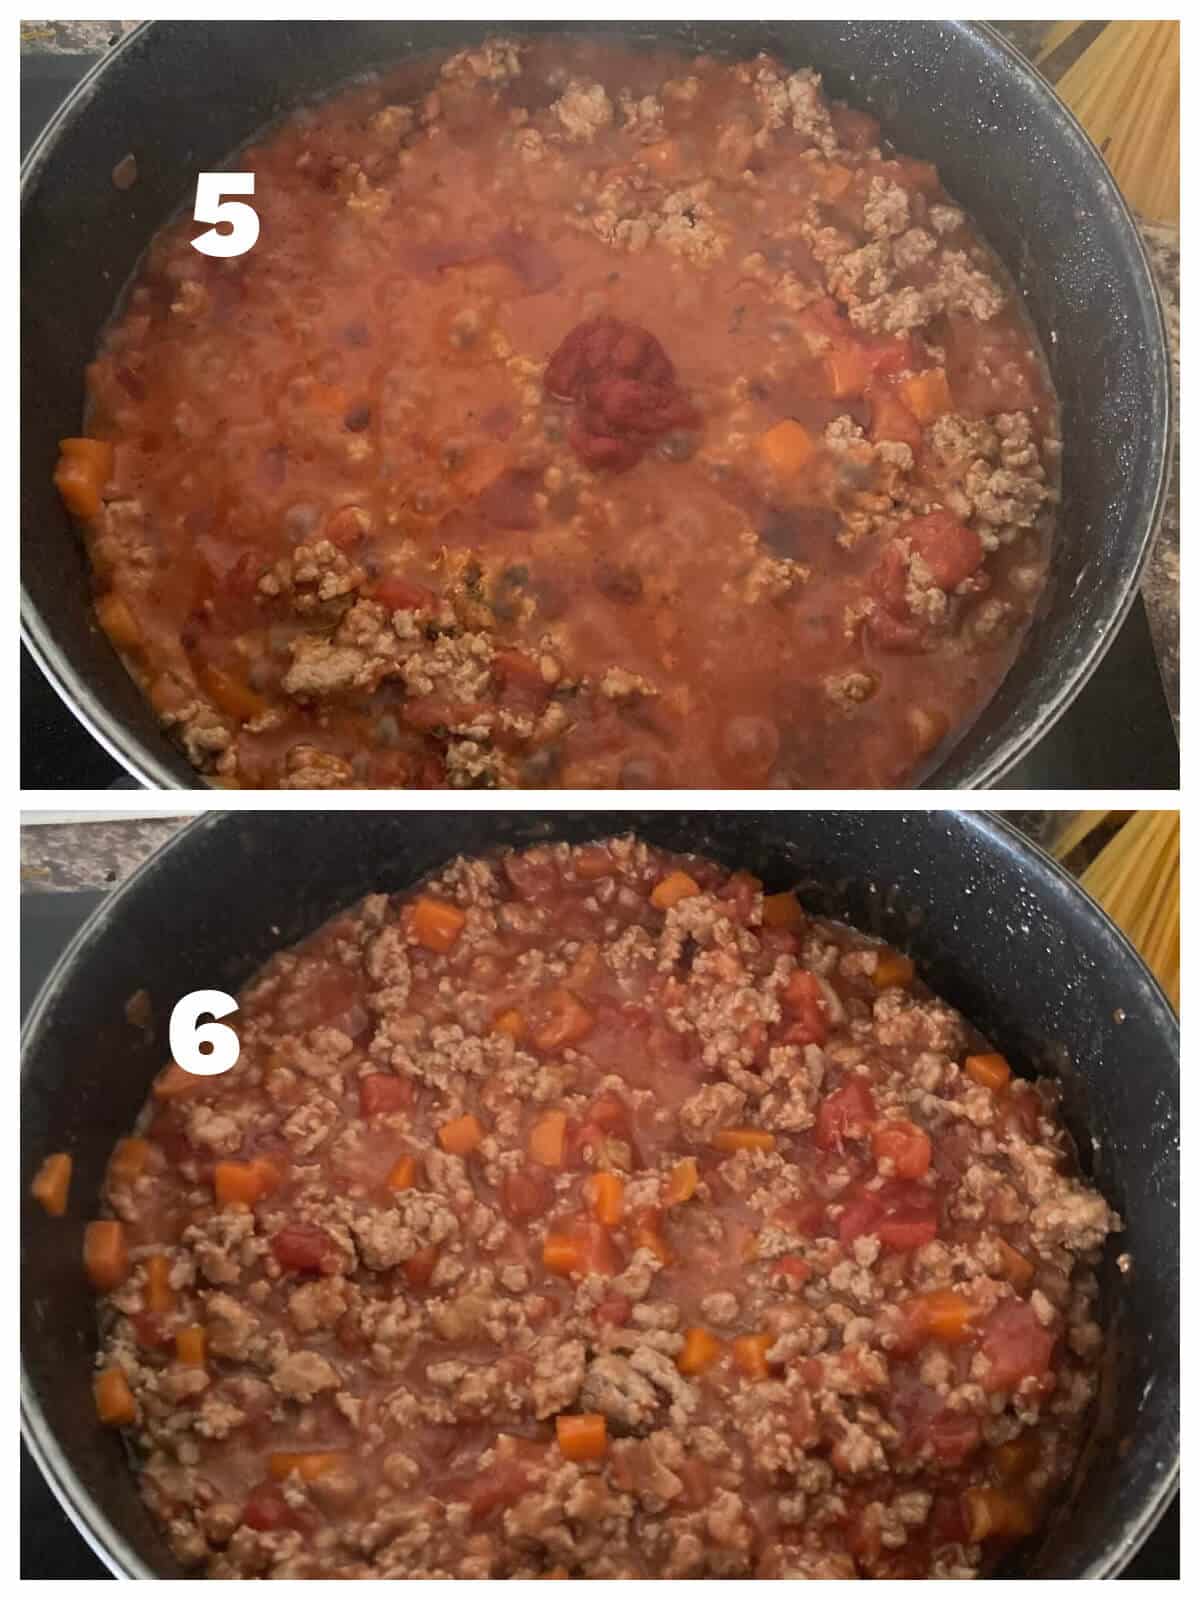 Collage of 2 photos to show how to make turkey mince bolognese.